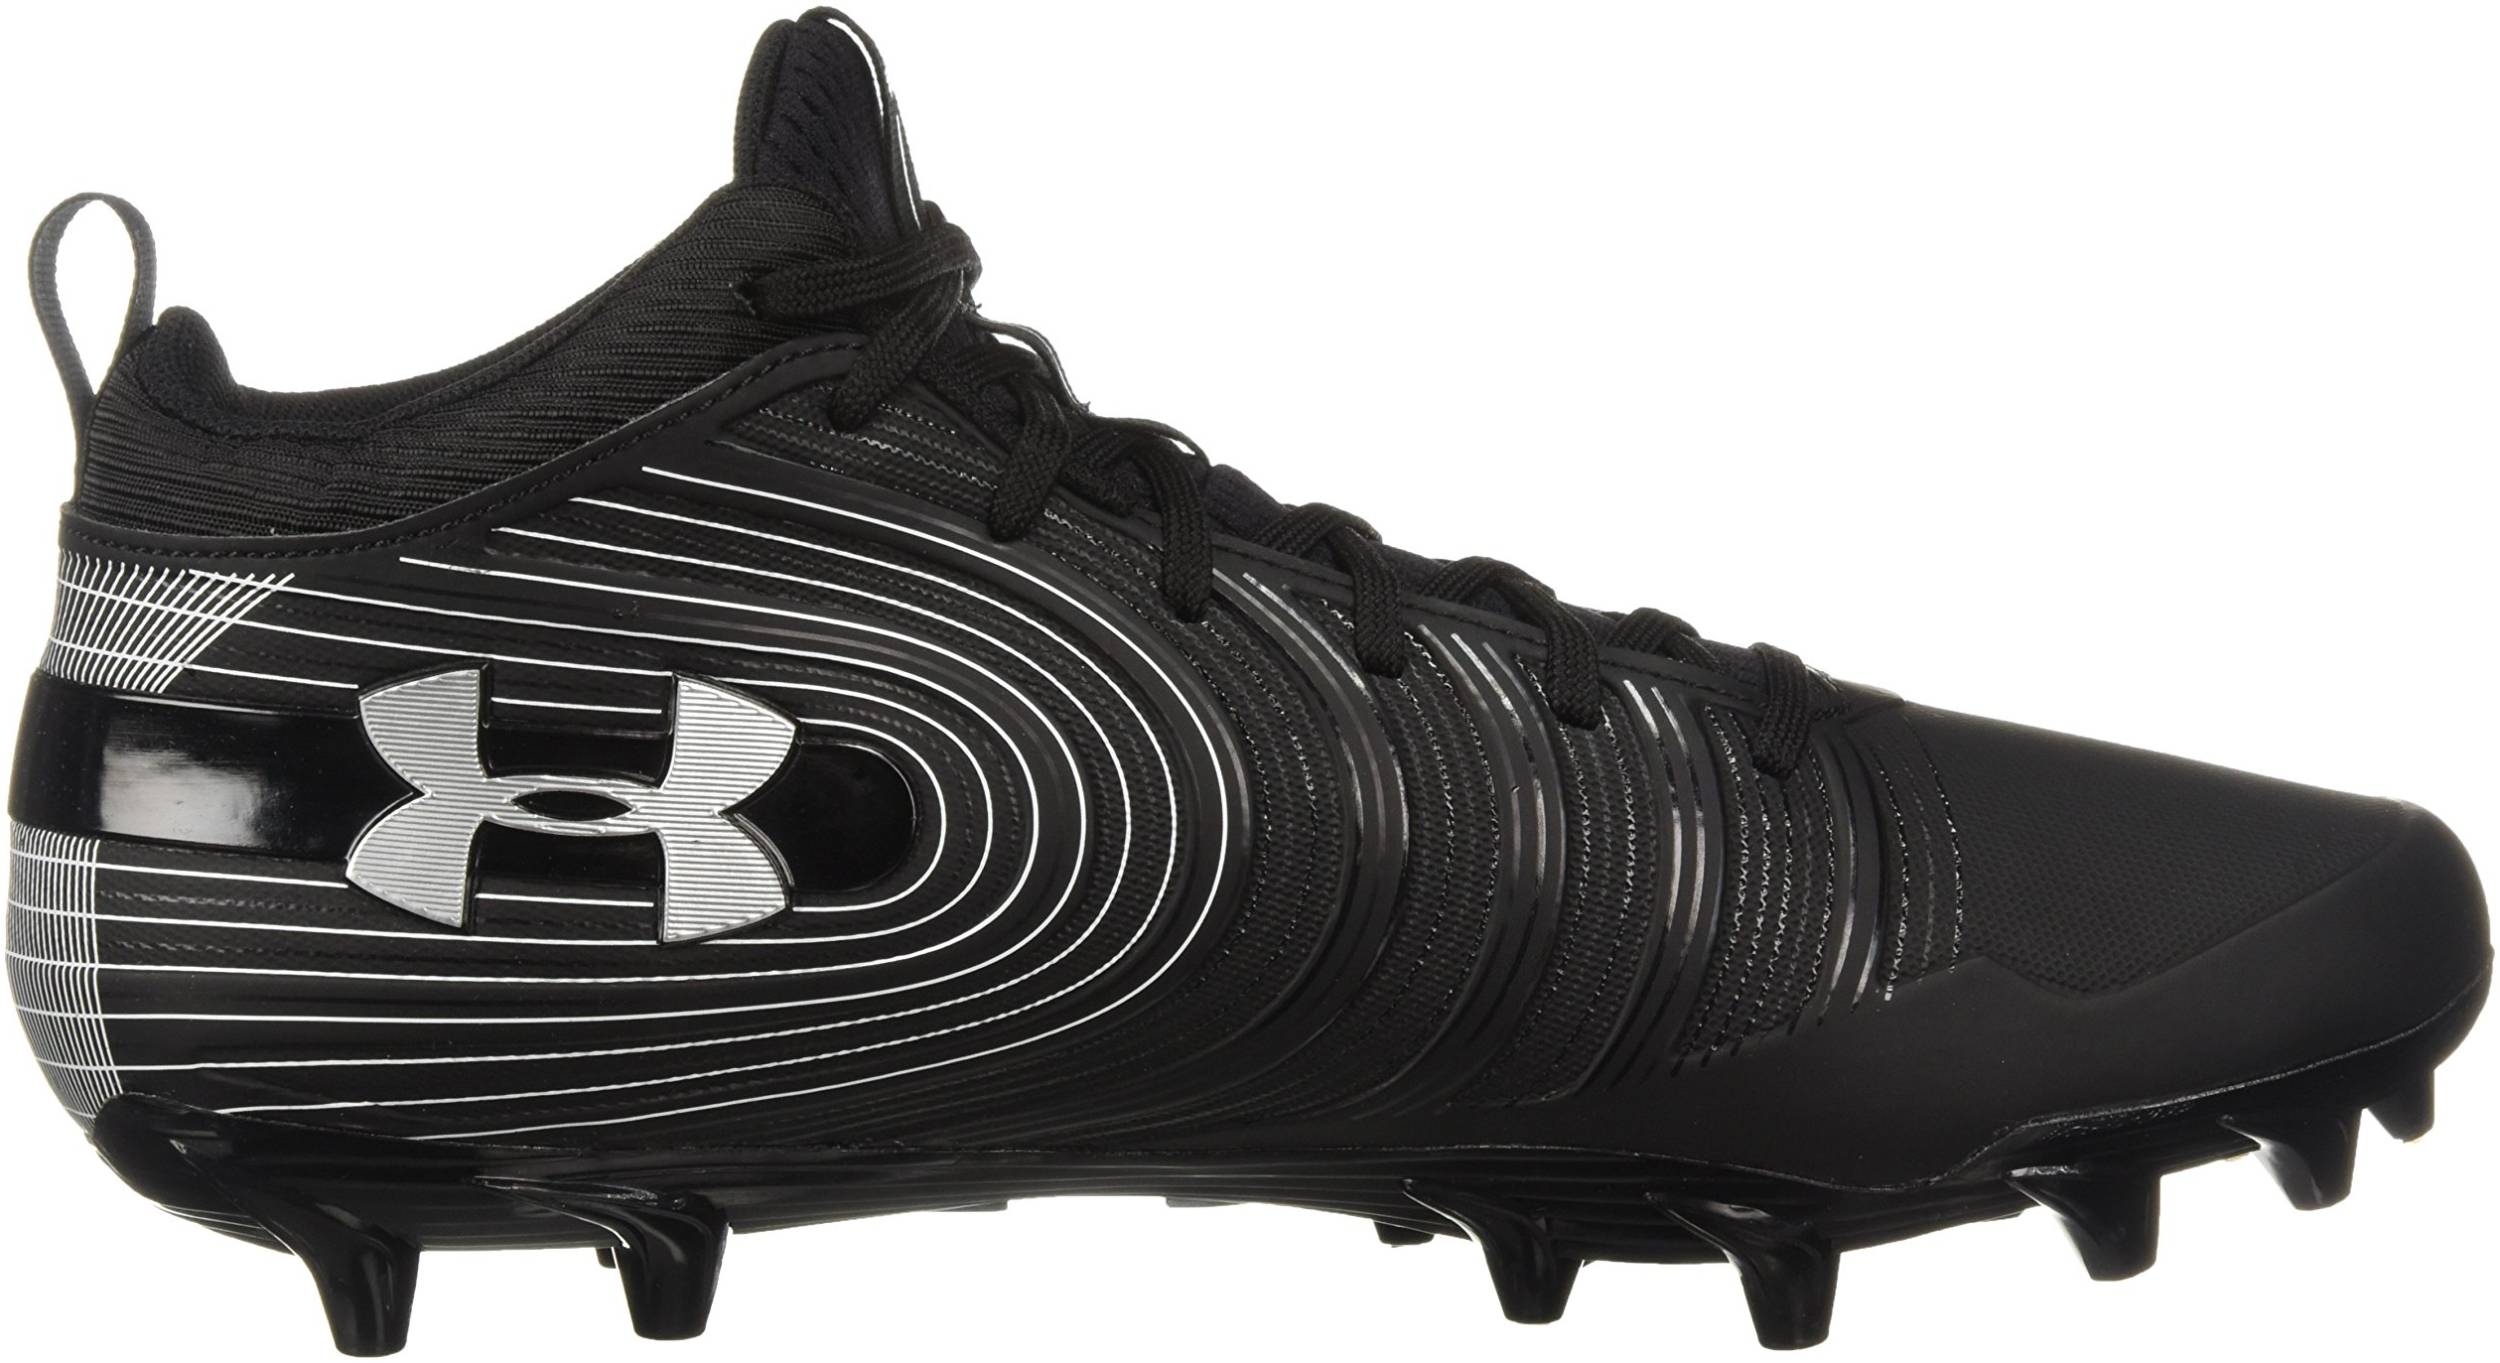 New Youth UA Under Armour Renegade RM Mid Football Cleats Black White Sz 3Y 